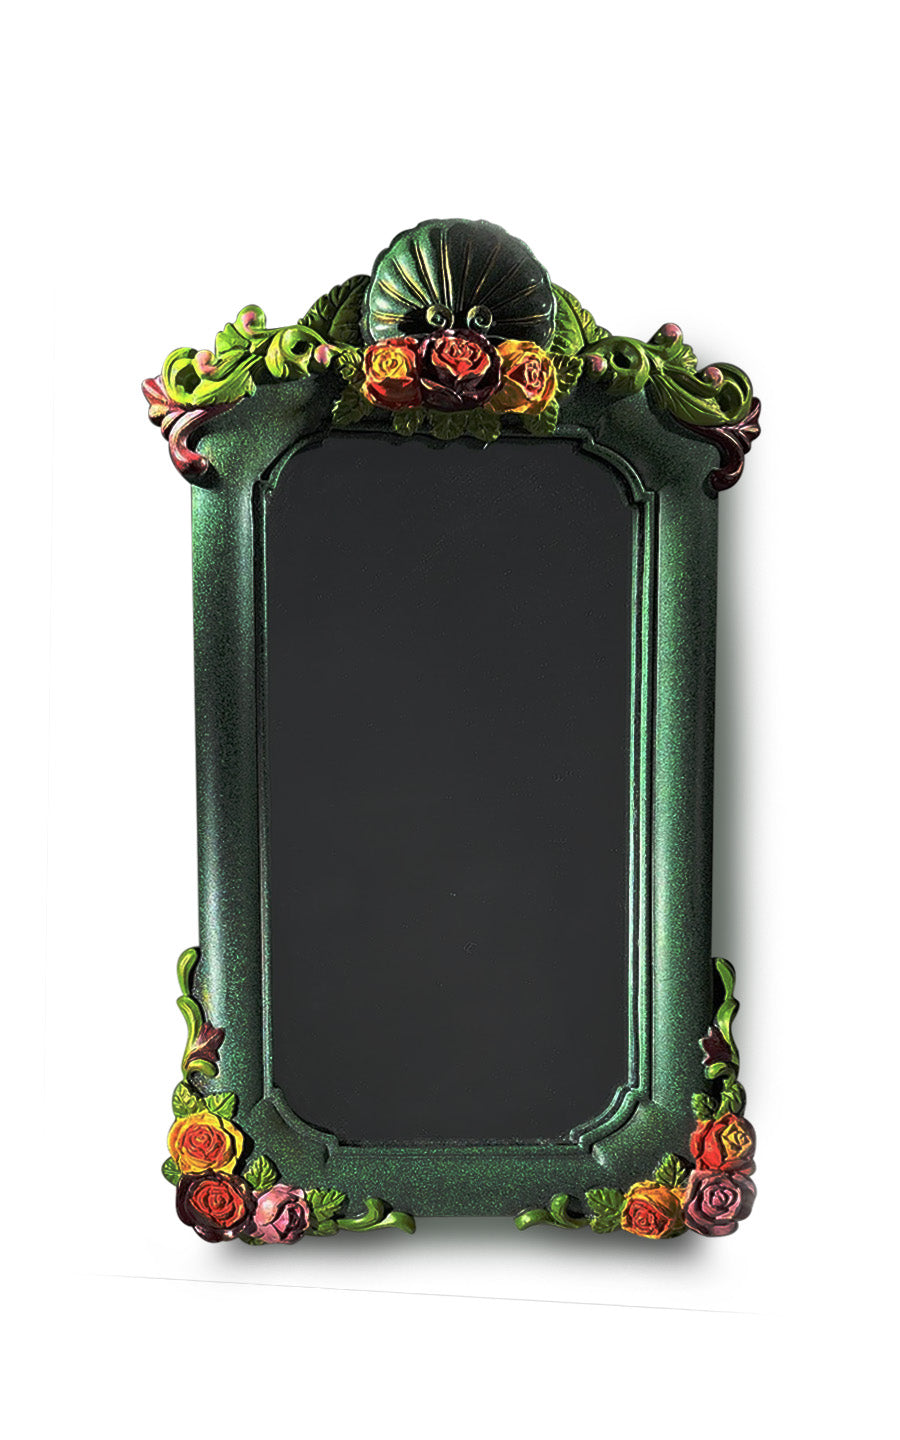 A mirror with a green frame